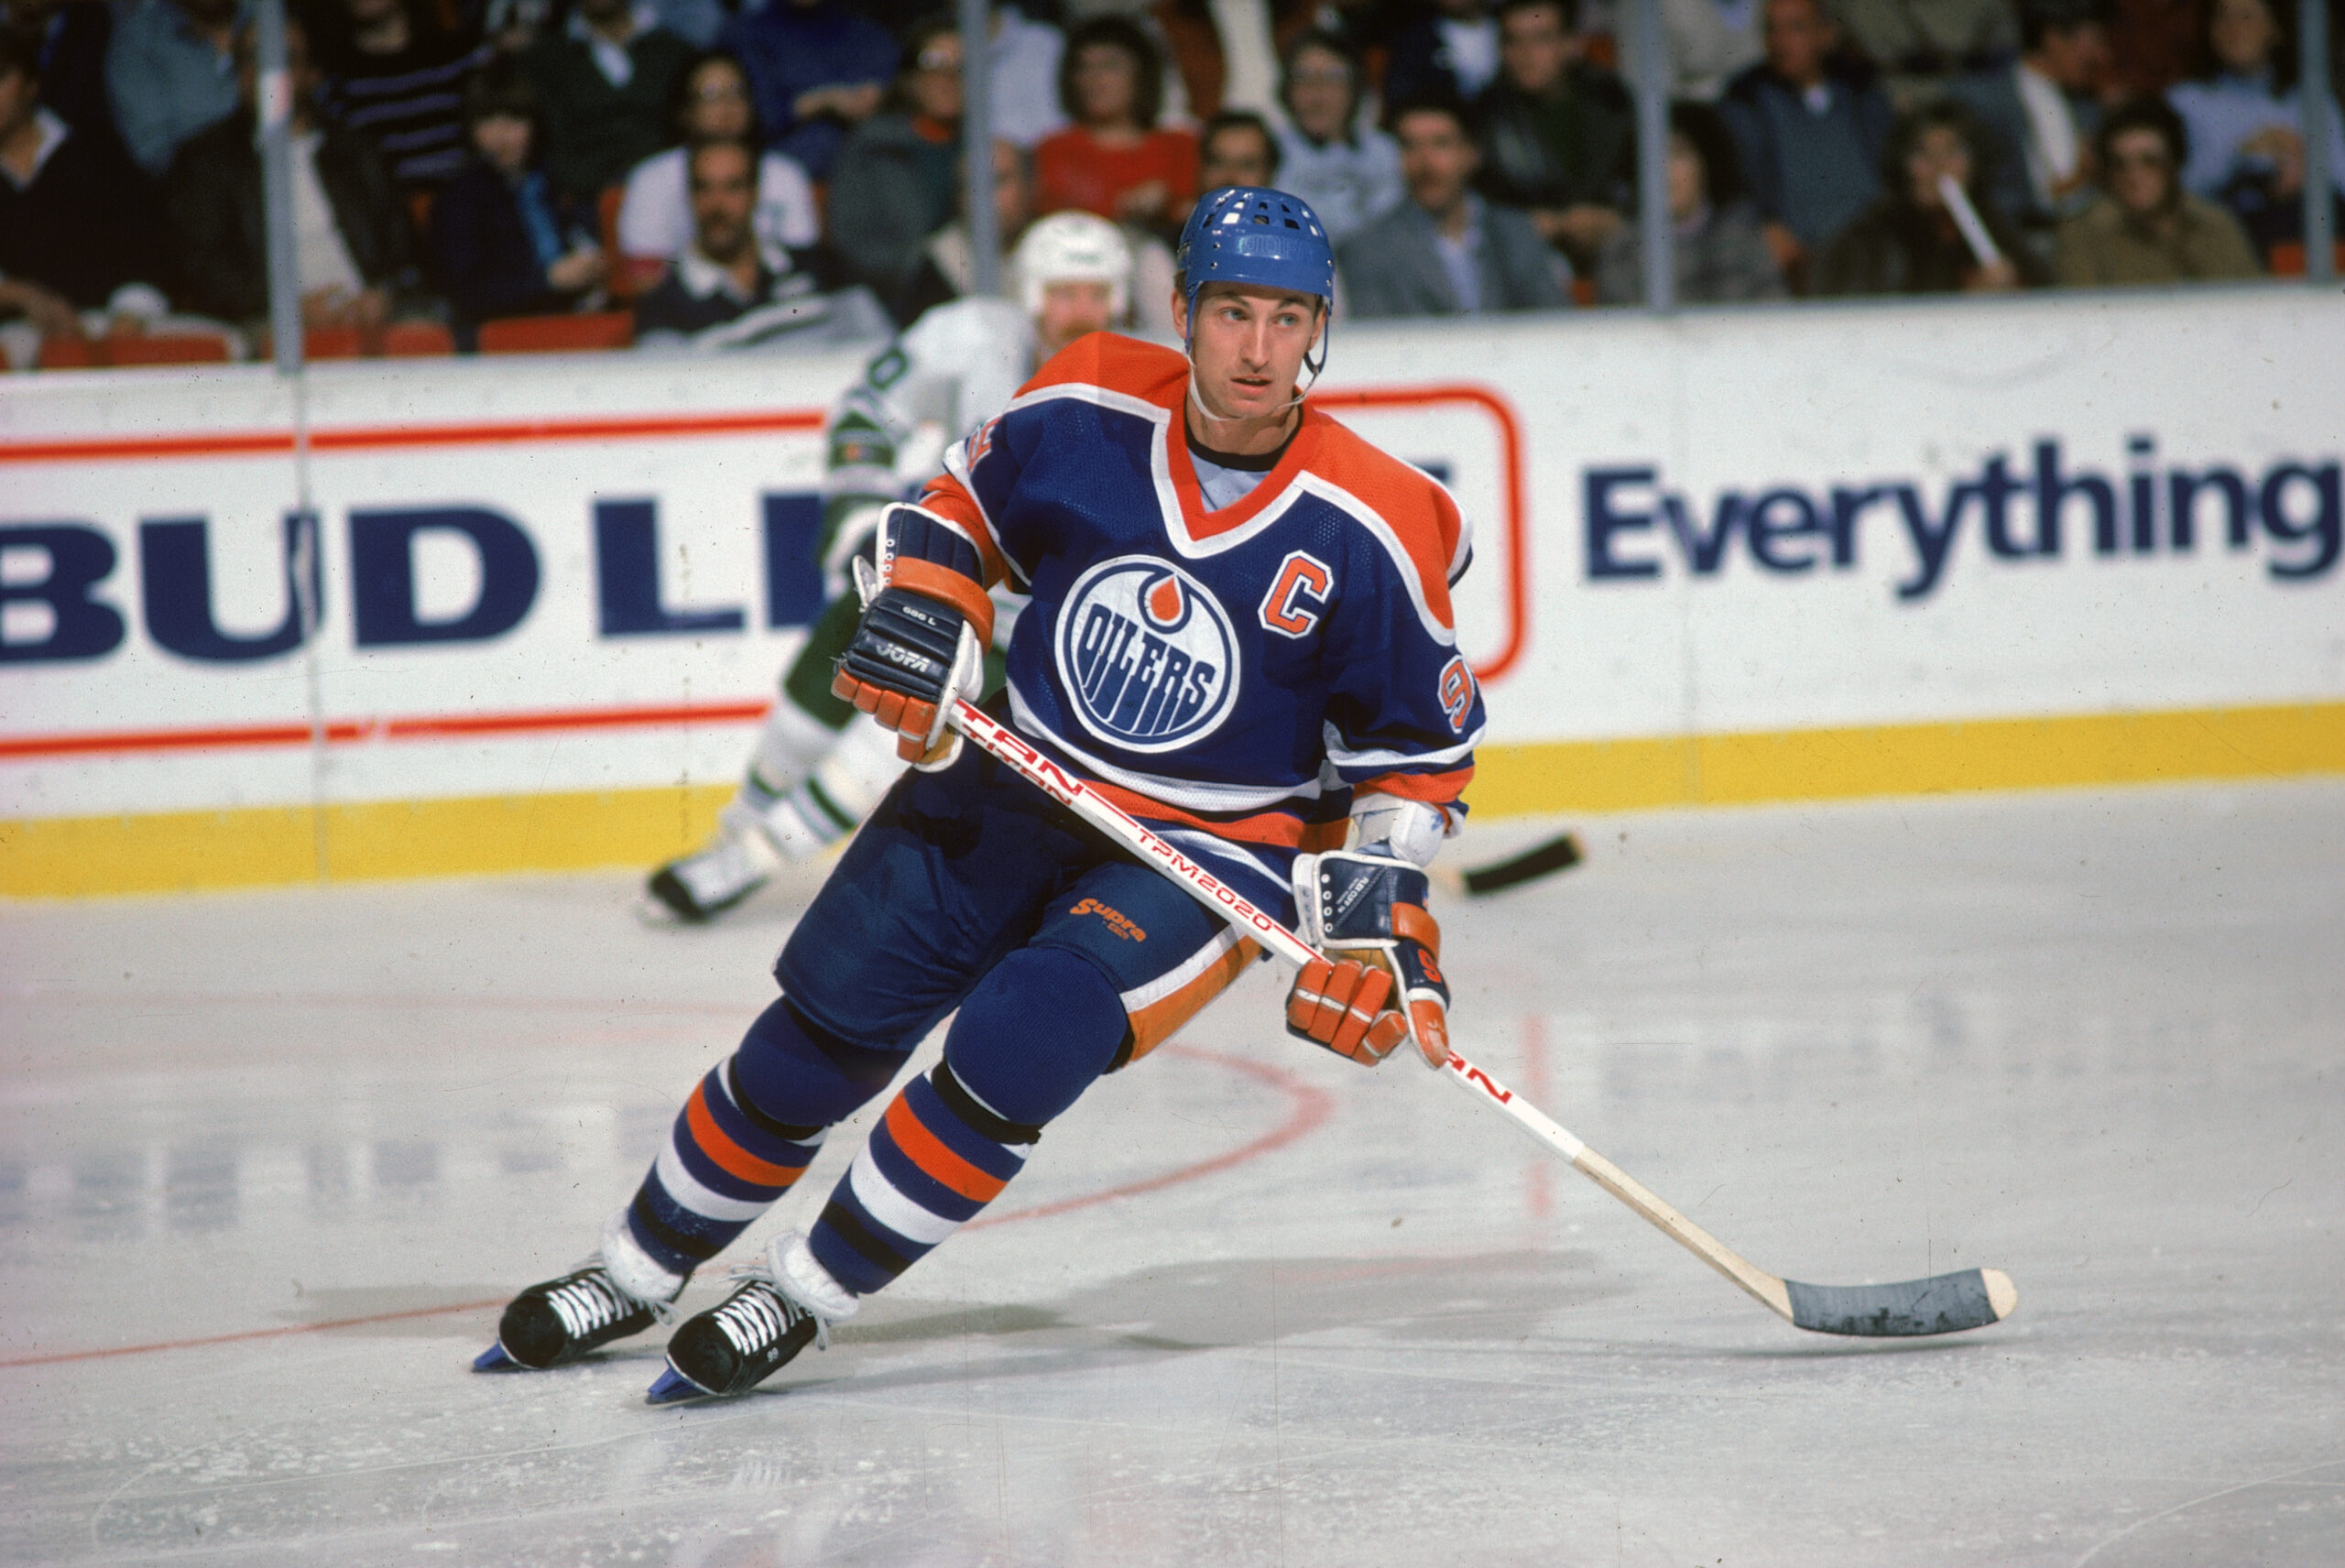 Wayne Gretzky trade tree: 'The Trade' and the many branches that